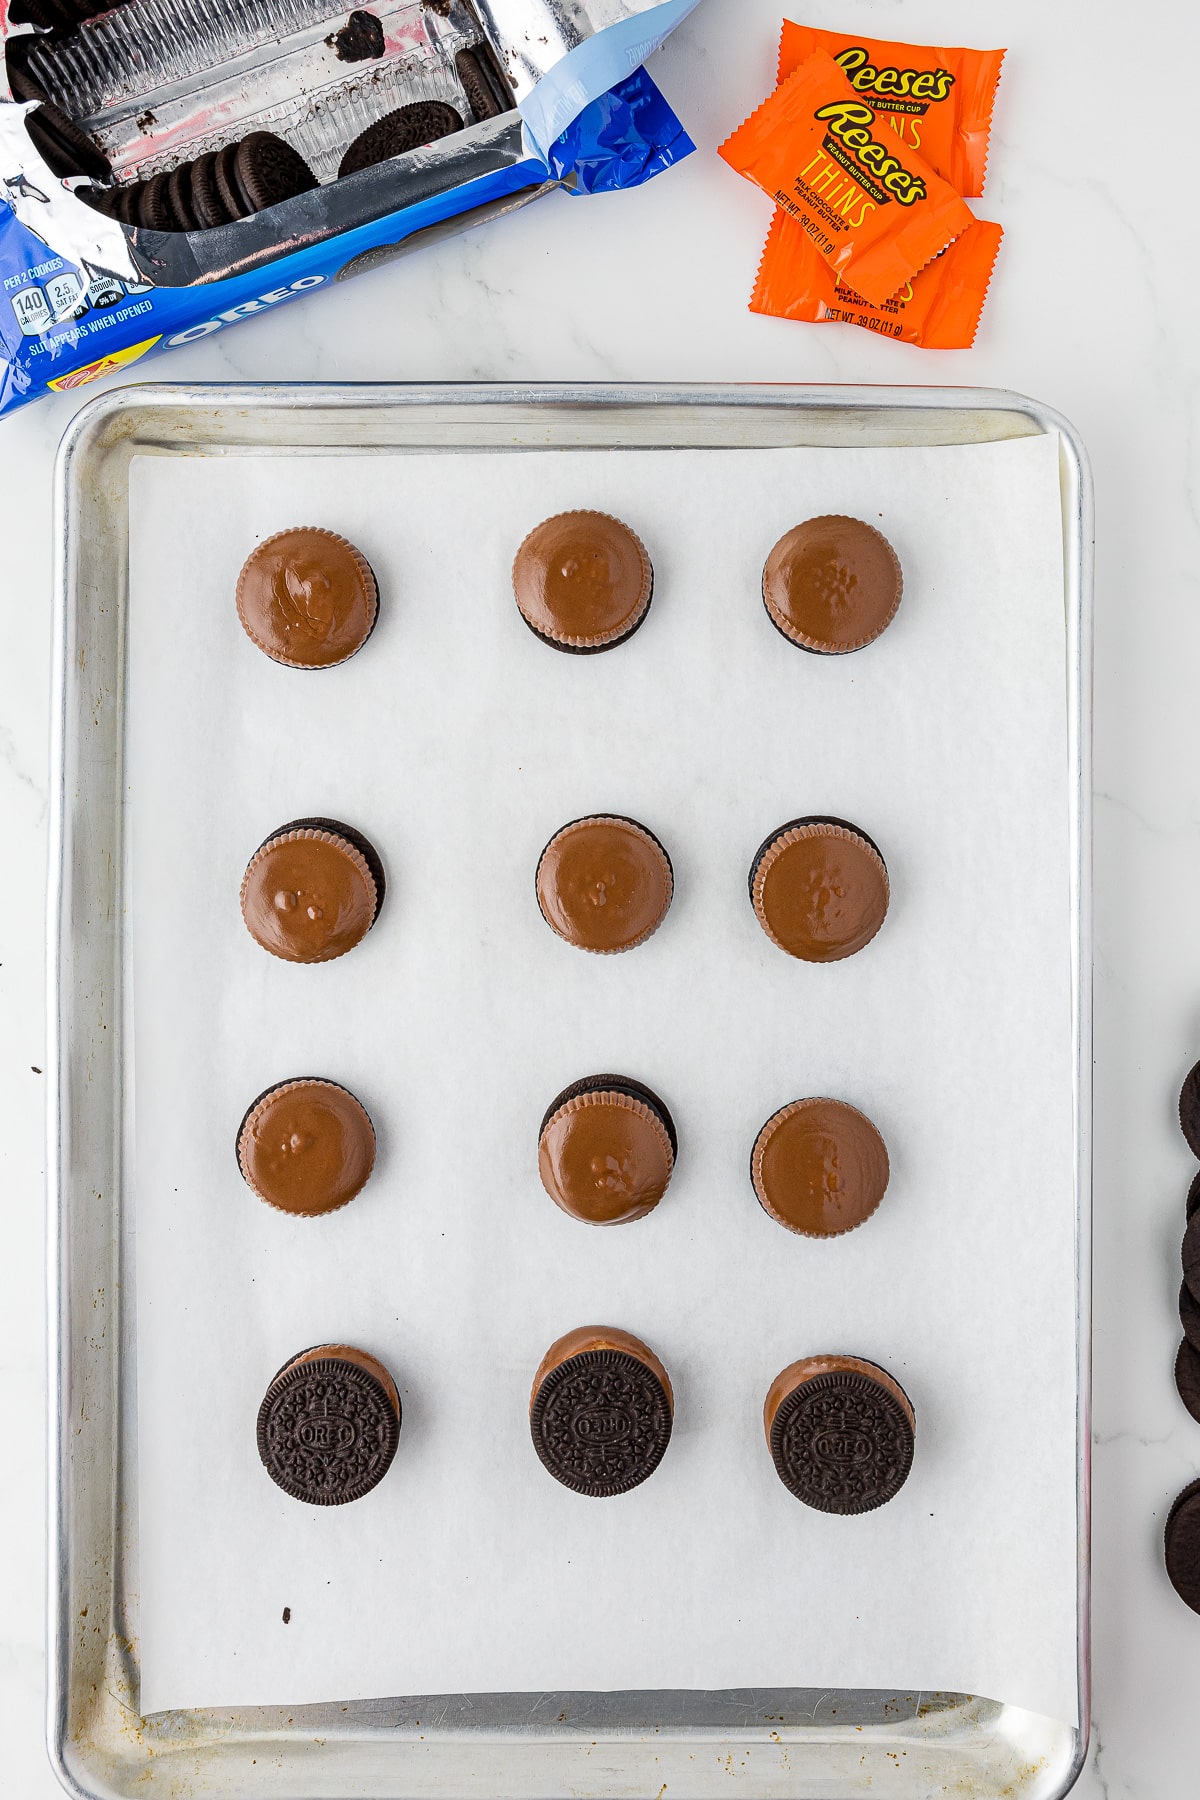 12 reese's oreos on parchment paper with oreos and reese's thins in wrappers on a white counter